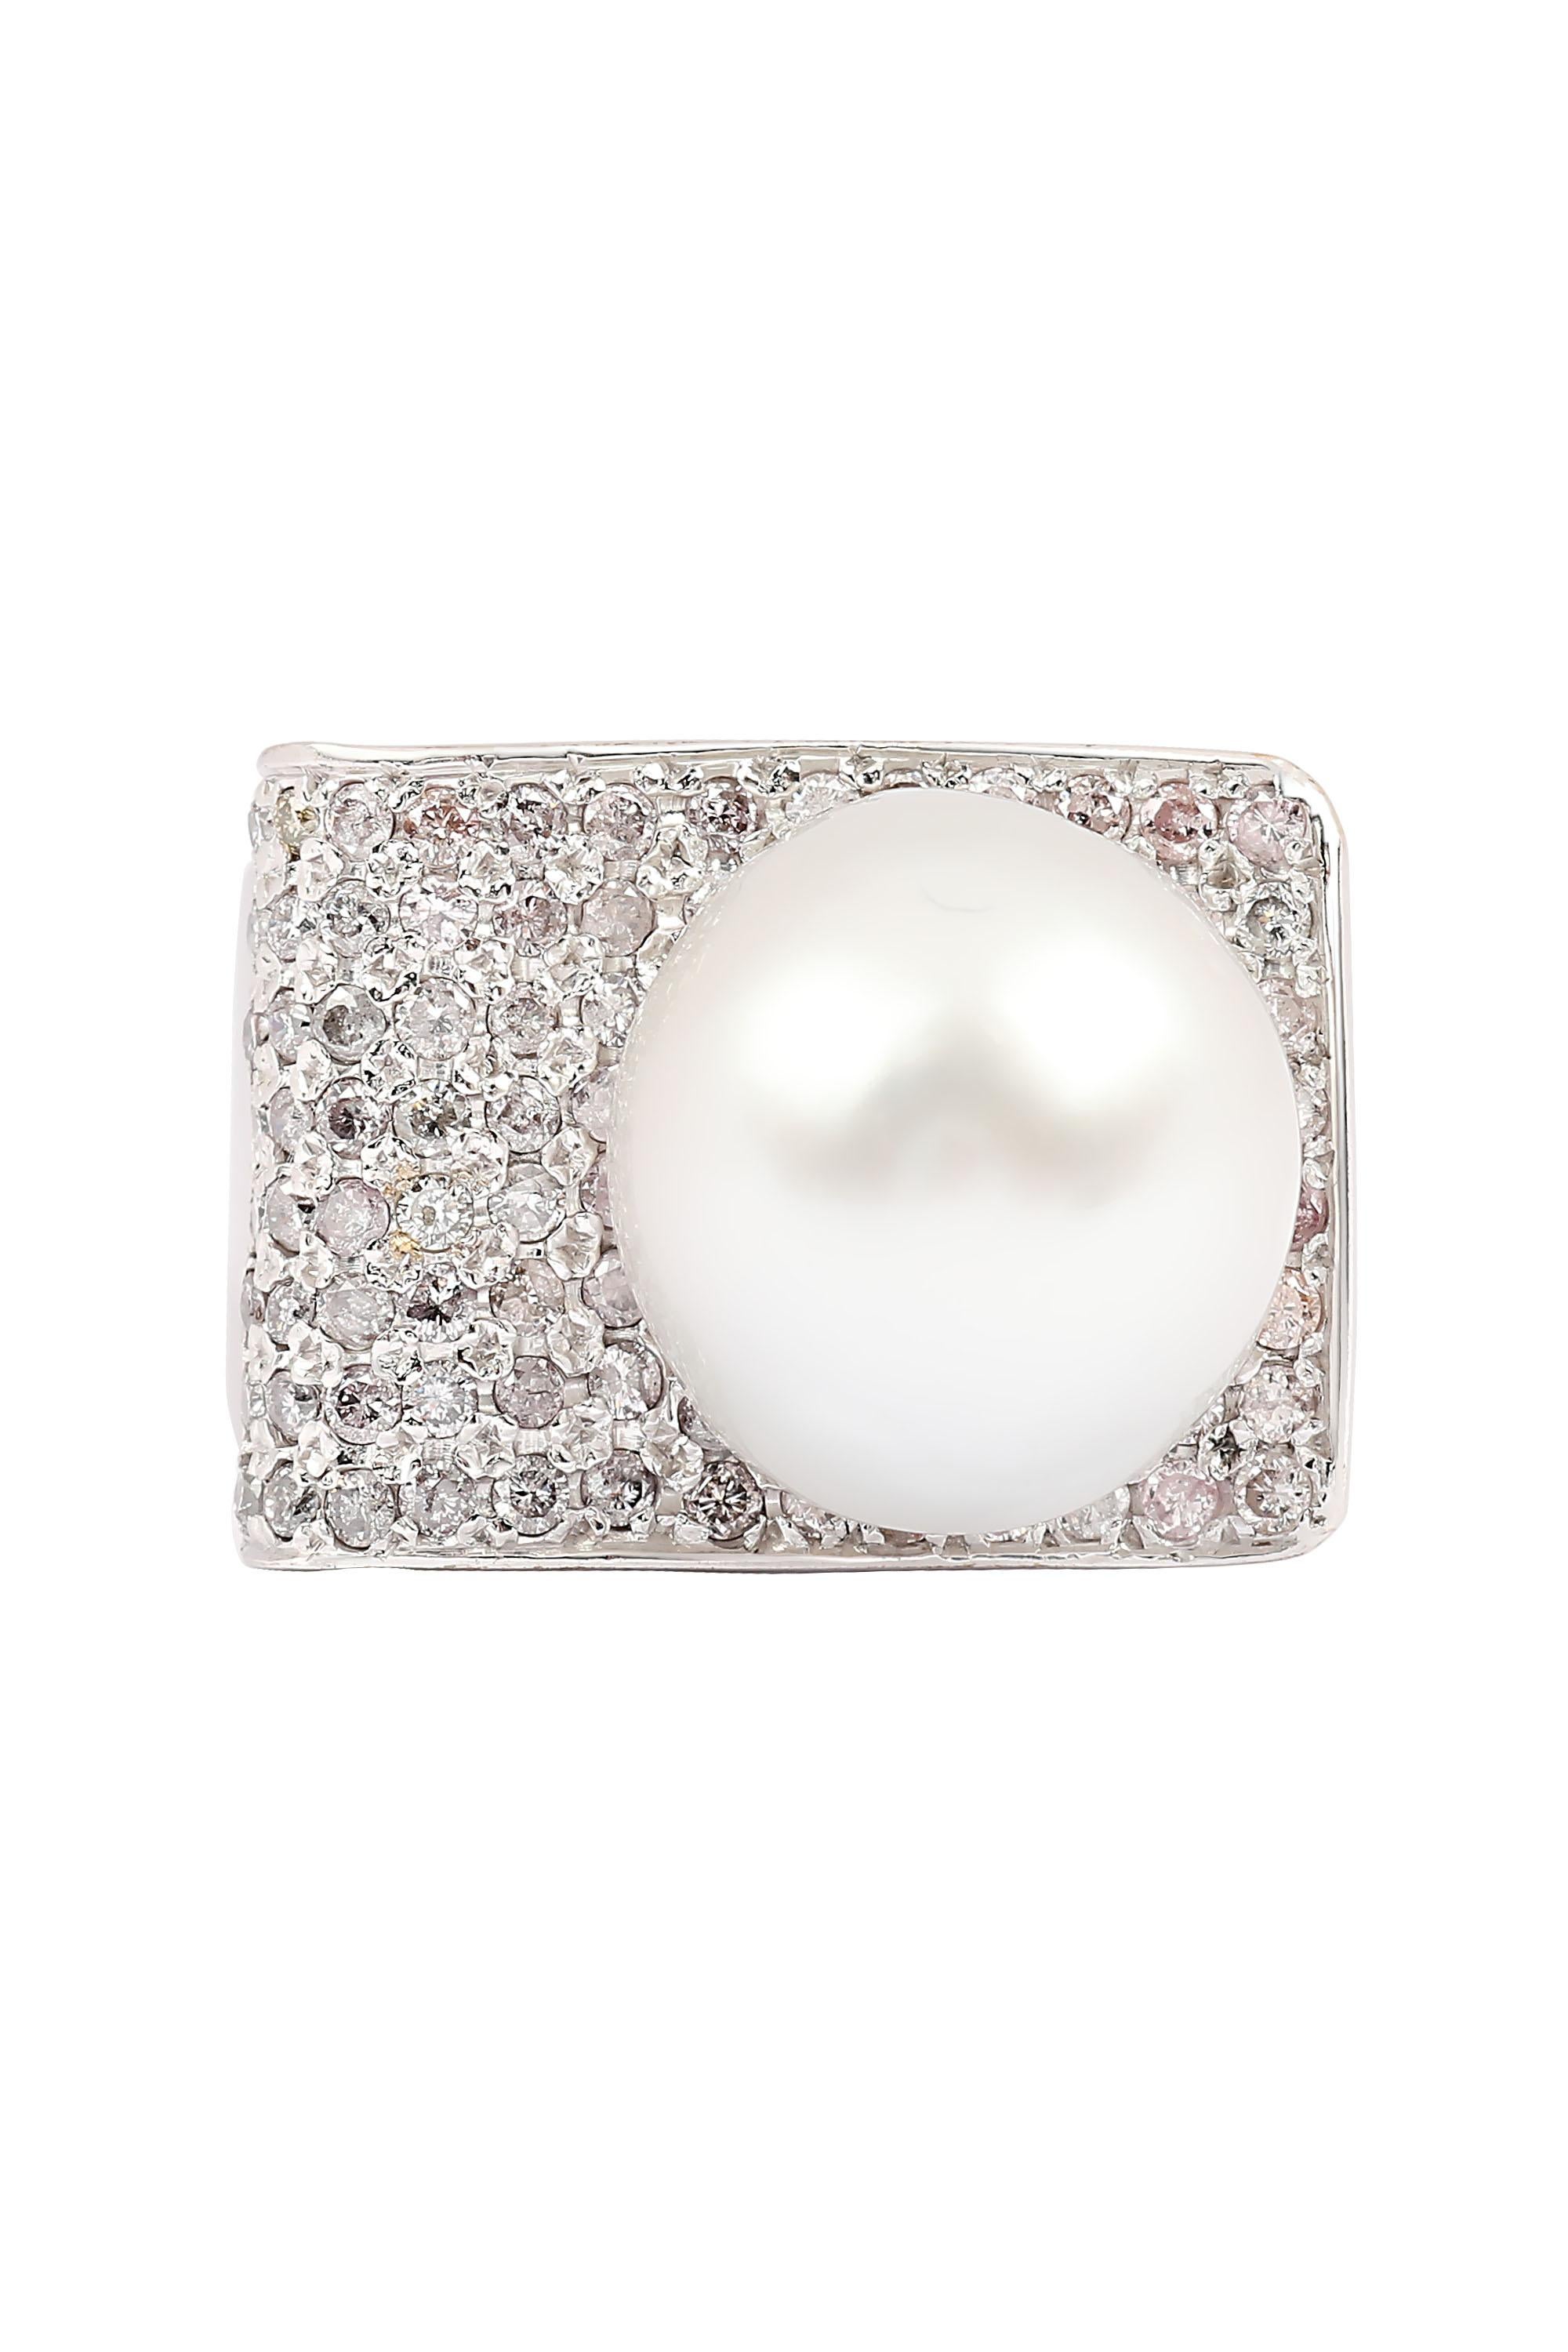 This modern and striking set features luxurious bright, cool white South Sea Pearls set amidst glittering fields of icy pave diamonds. The ring features a 13.8 mm South Sea Pearl set upon a ribbon of approximately .70 carats of round pave diamonds.